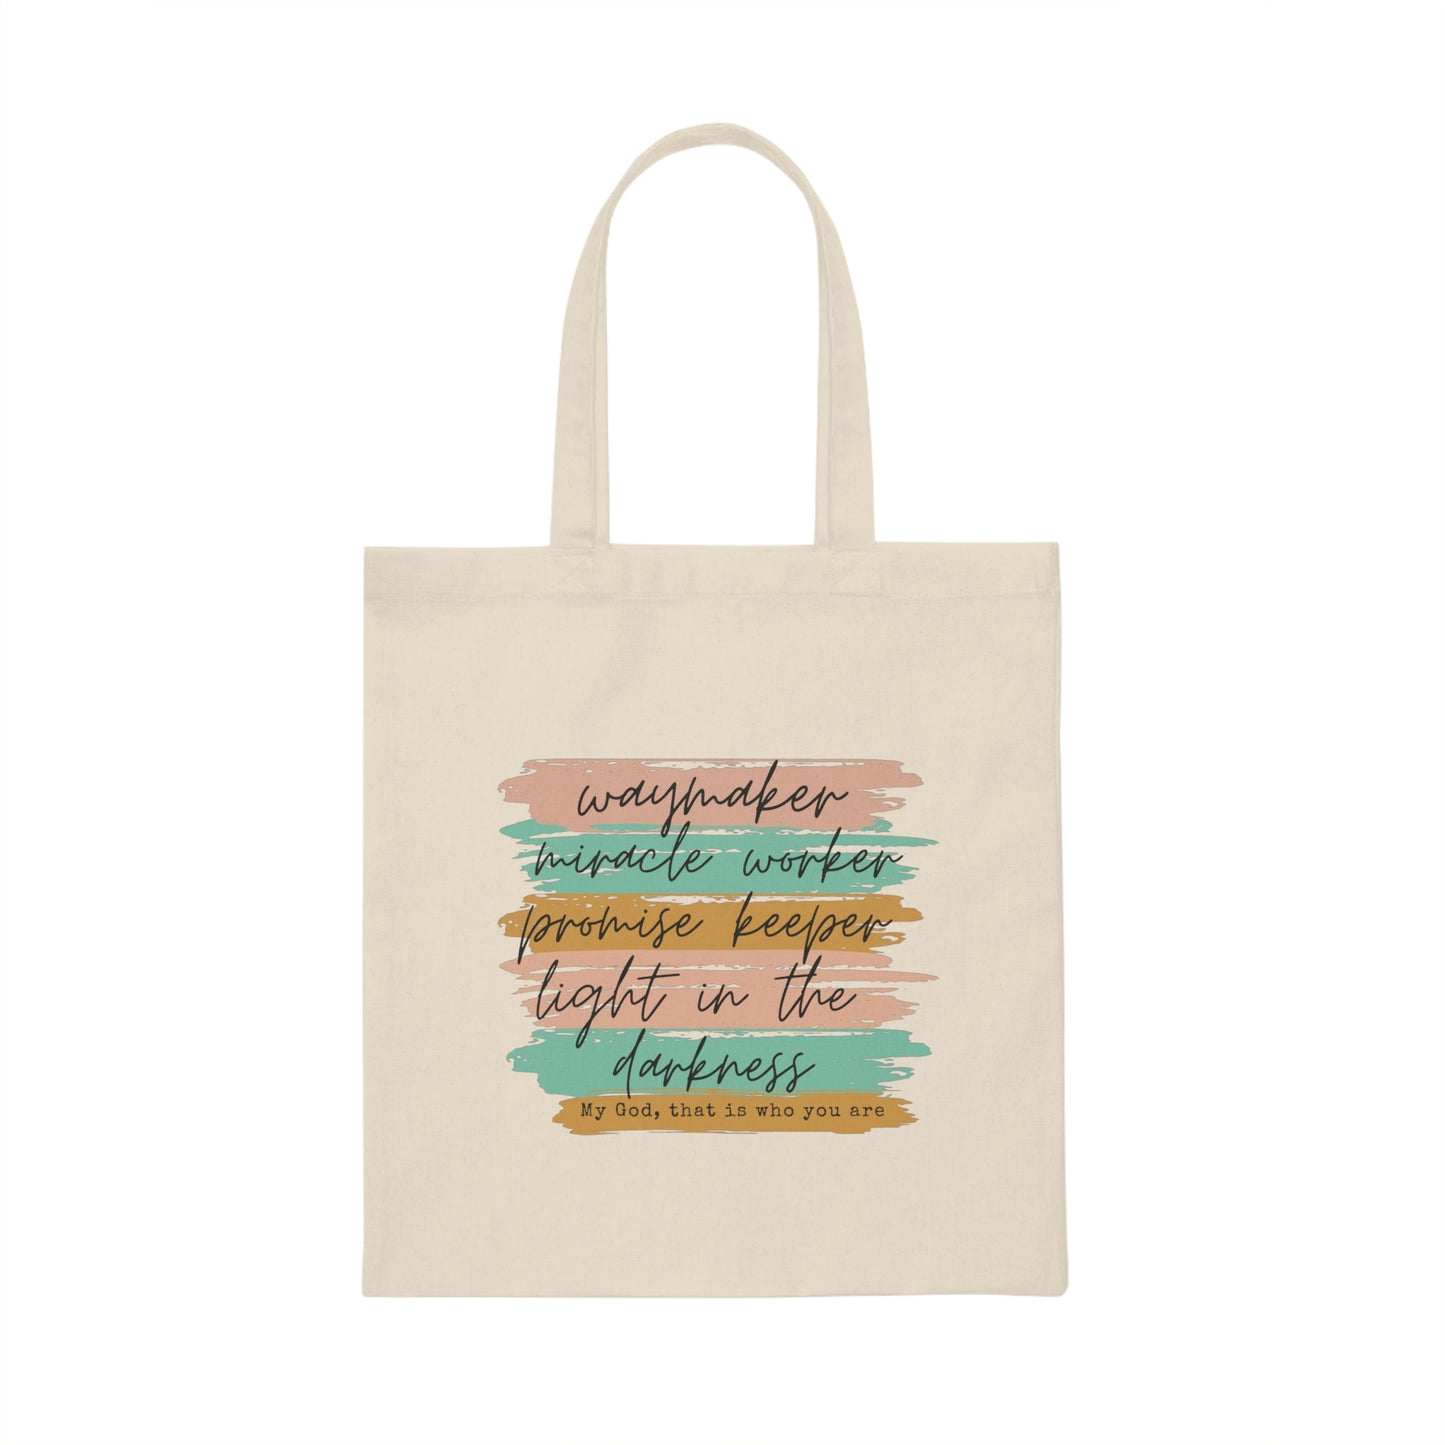 Waymaker Christian Canvas Tote